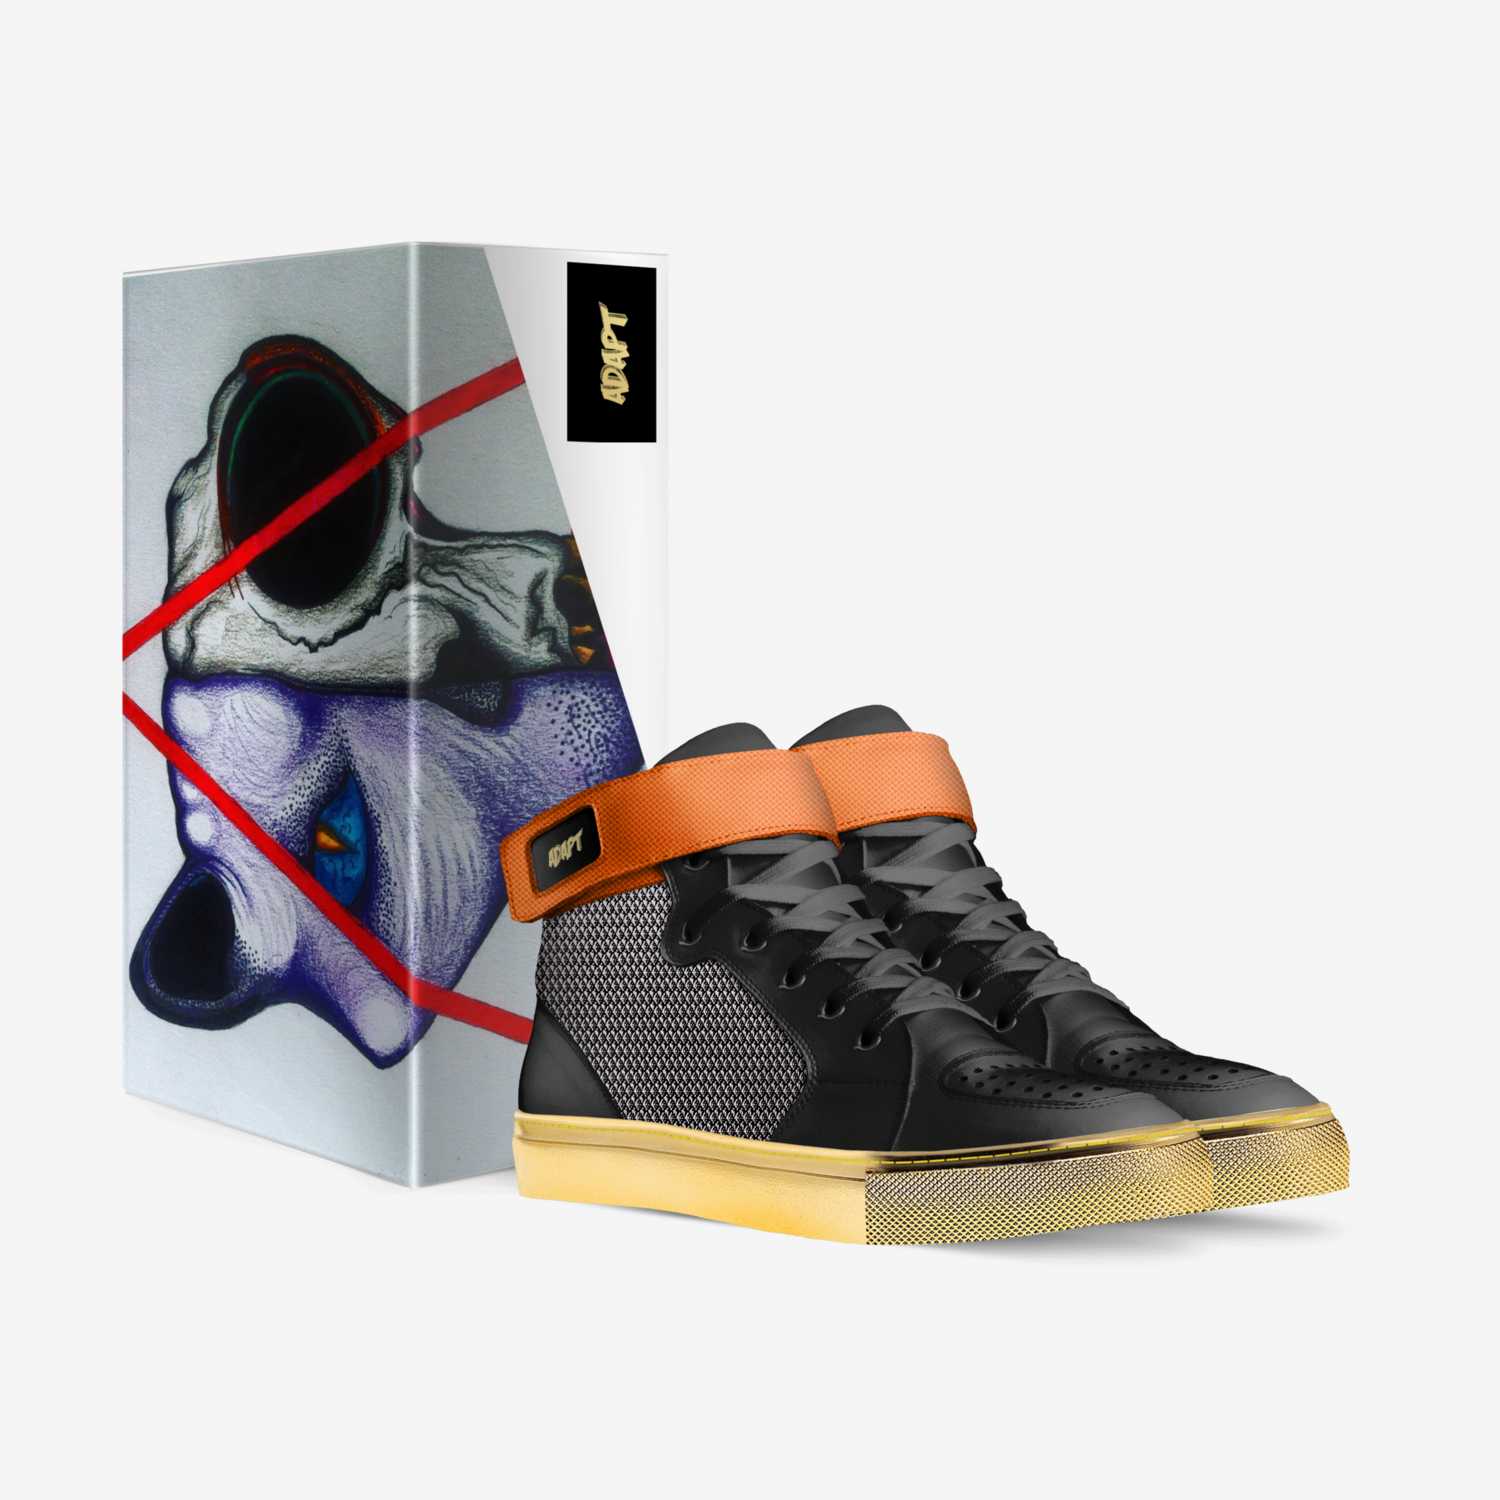 ADAPT FOOTWEAR custom made in Italy shoes by Bryan De Salvo | Box view